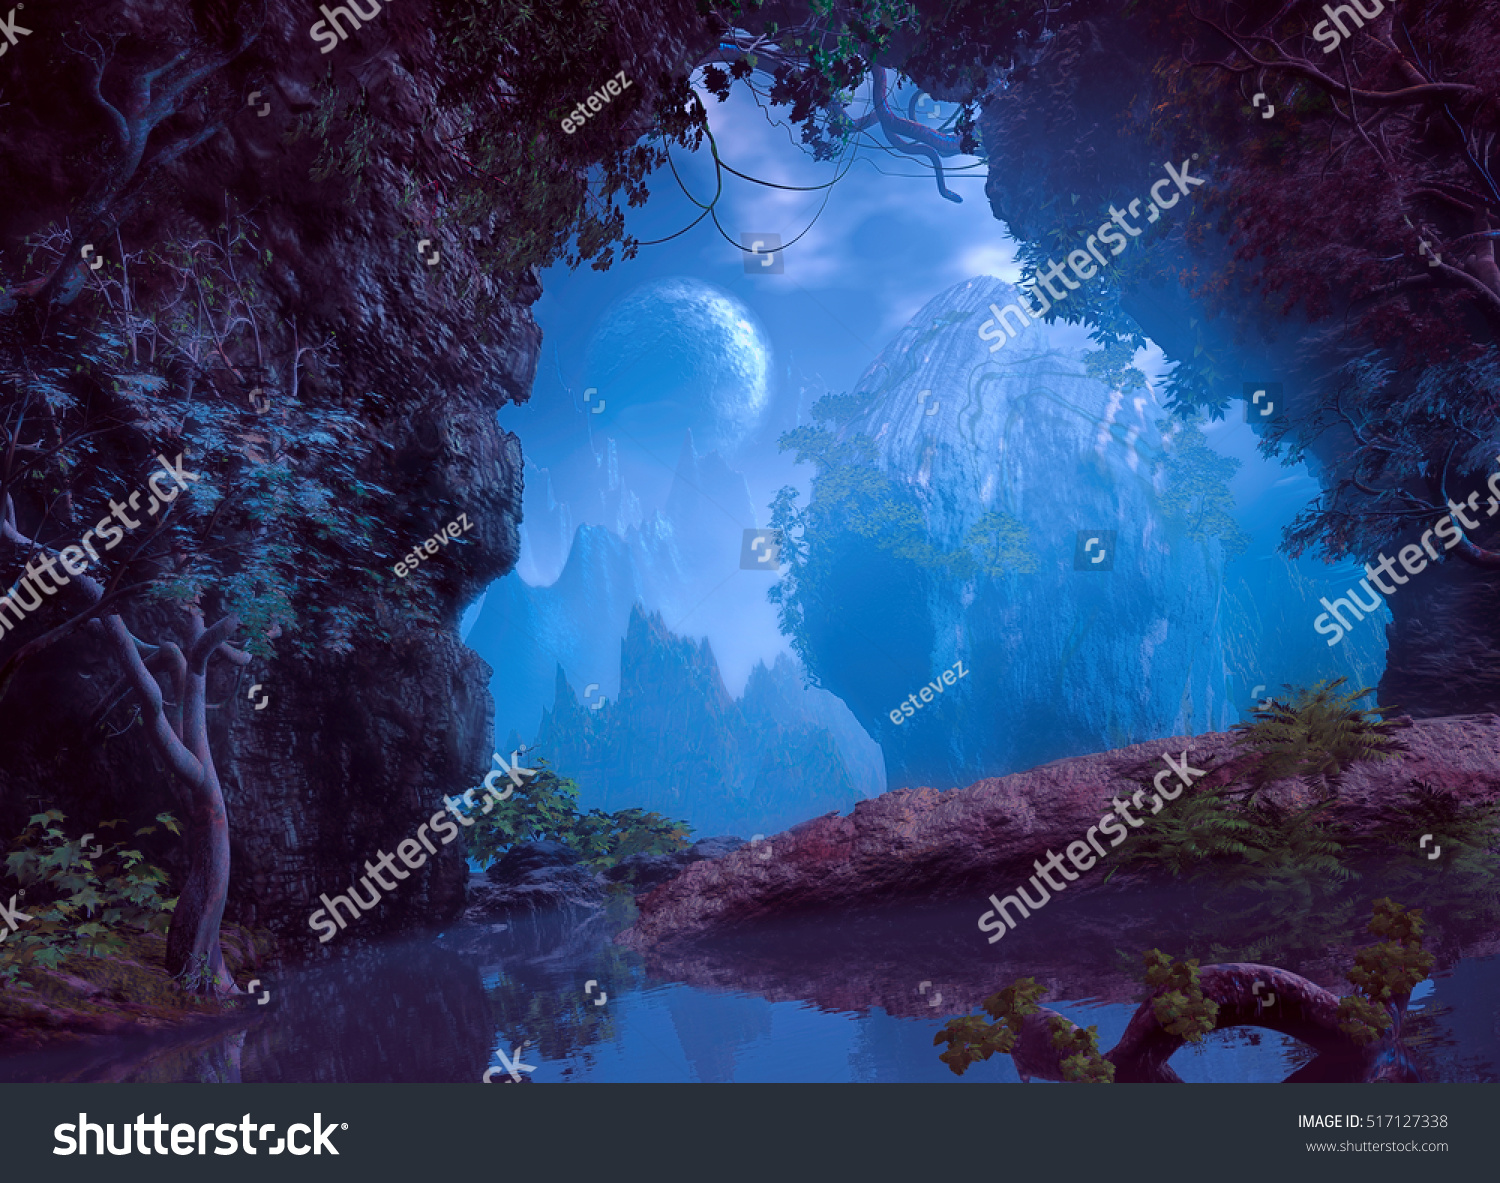 3D illustration of part of a cave with a small lake and vegetation from which one has a view of a landscape with a large rock to the center and mountains in a very cloudy atmosphere #517127338